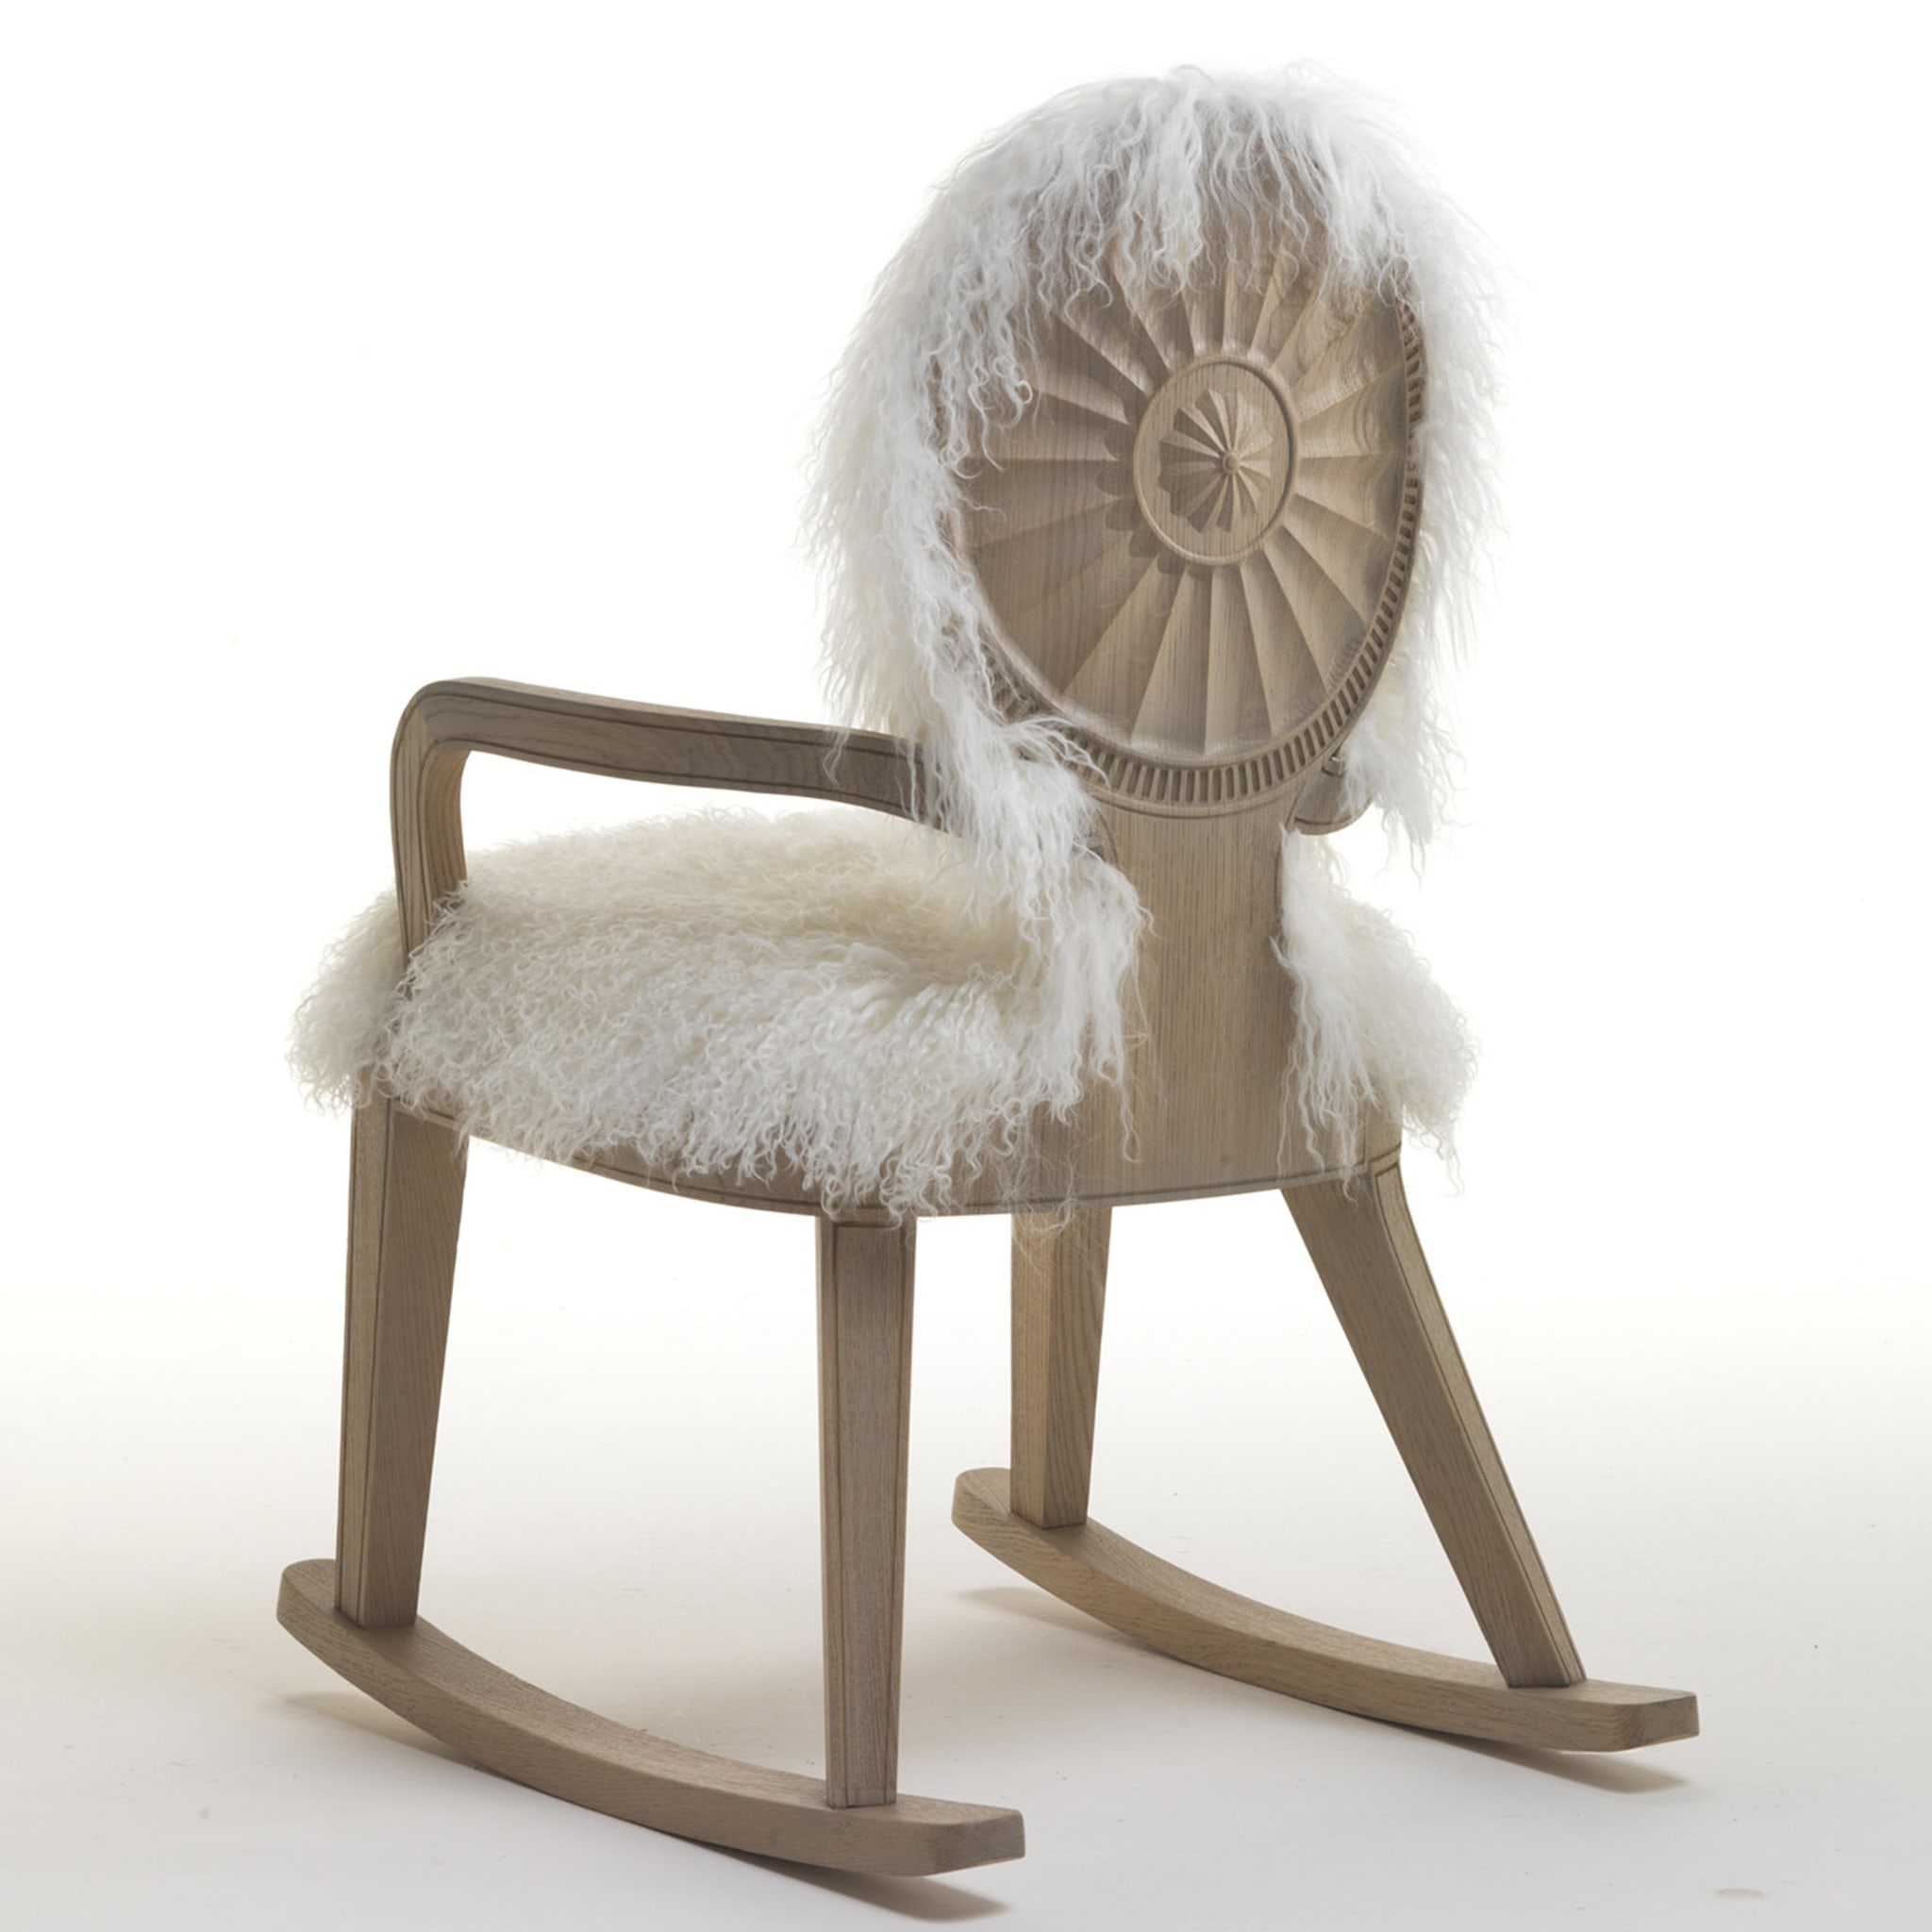 Monarch Rocking Chair by Archer Humphryes Architects - Alternative view 1